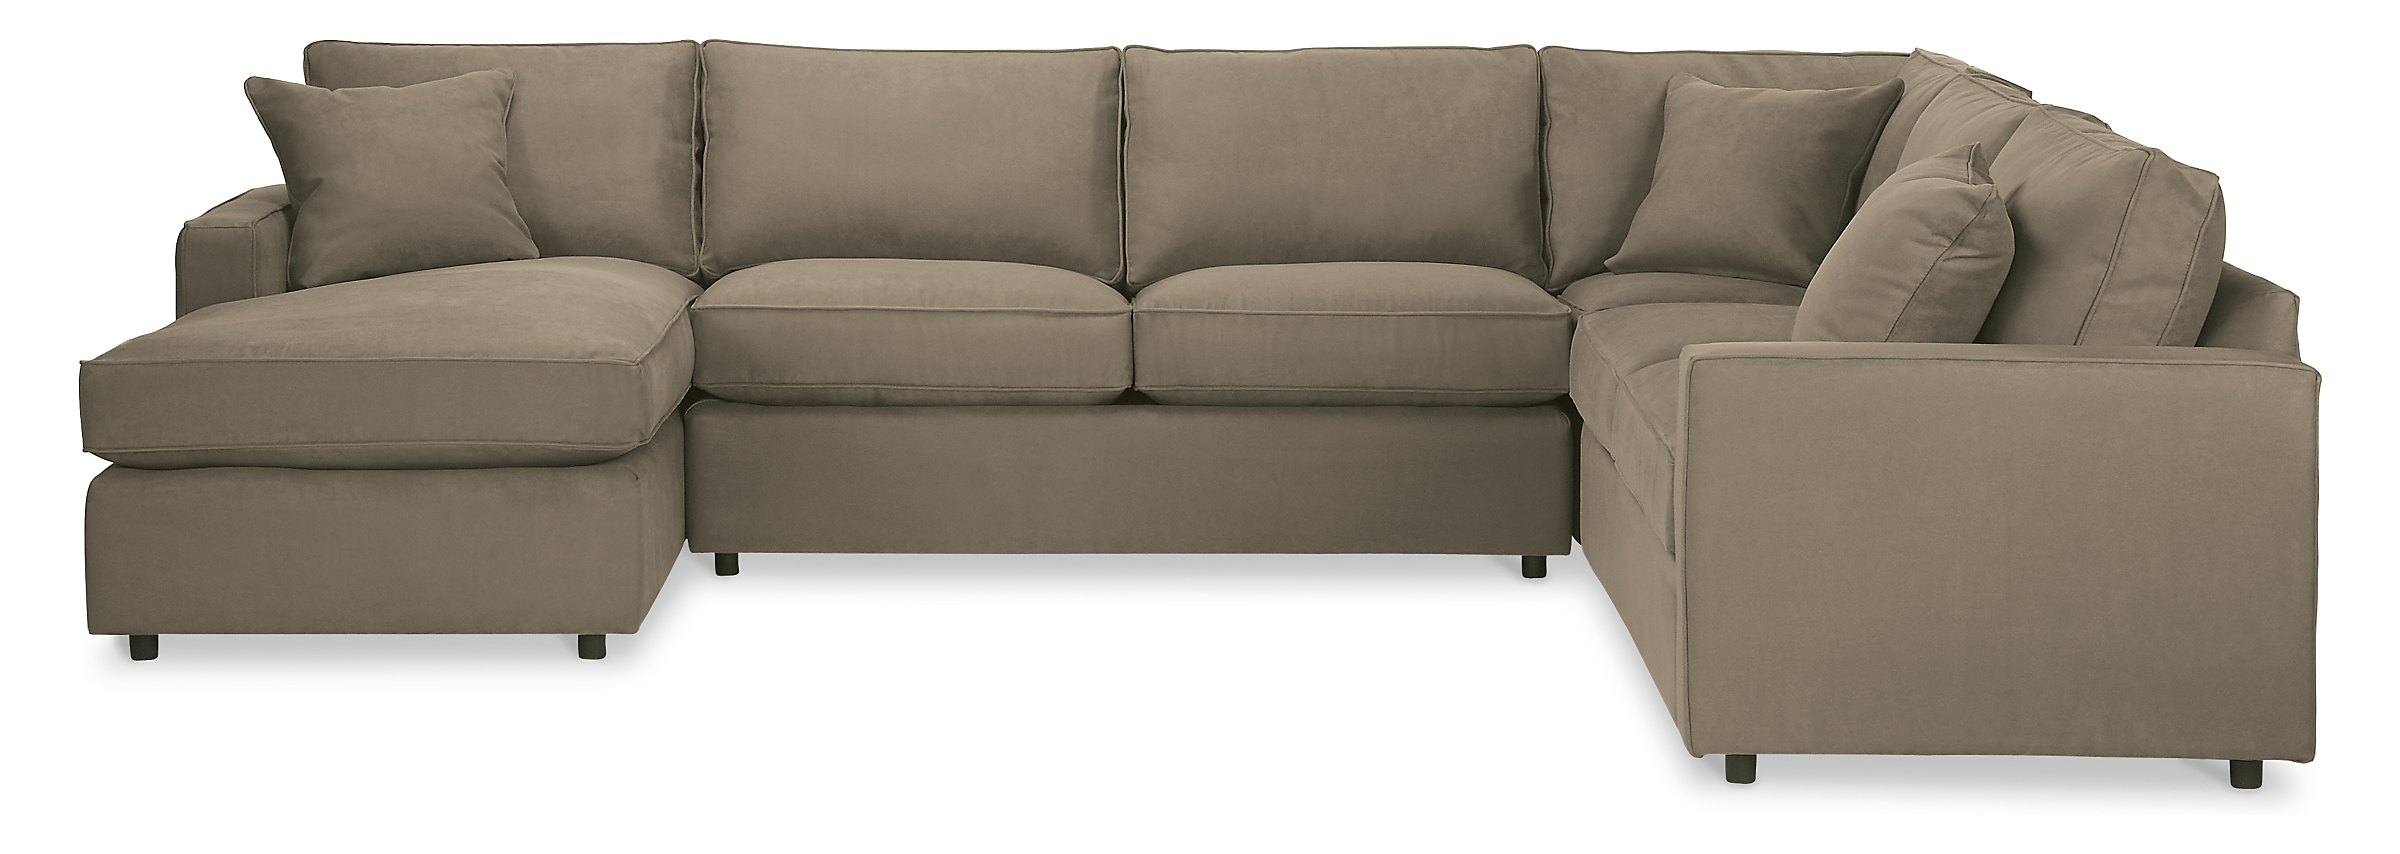 York 136x103" Four-Piece Sectional with Left-Arm Chaise